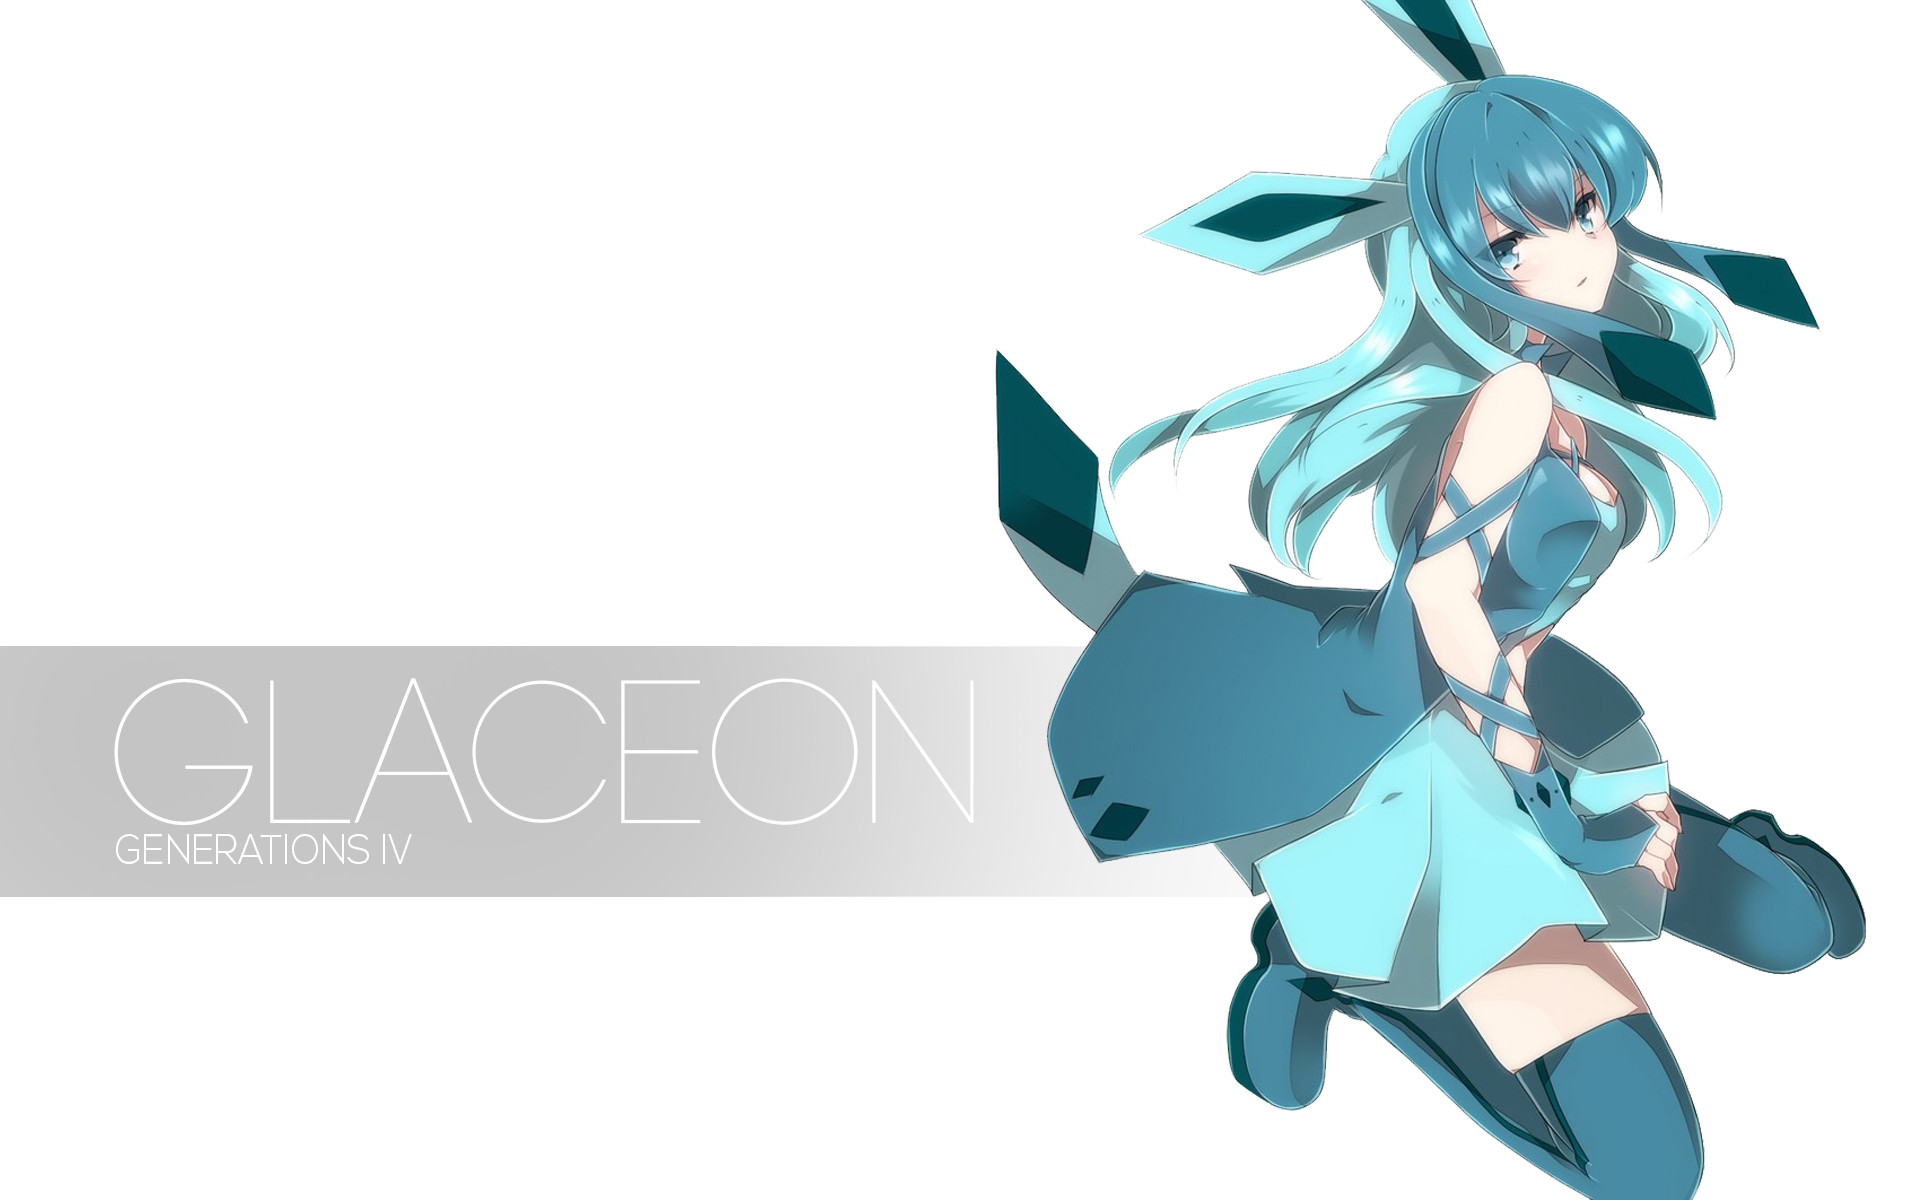 Glaceon Girl Wallpaper - Pokemon Glaceon Girl , HD Wallpaper & Backgrounds